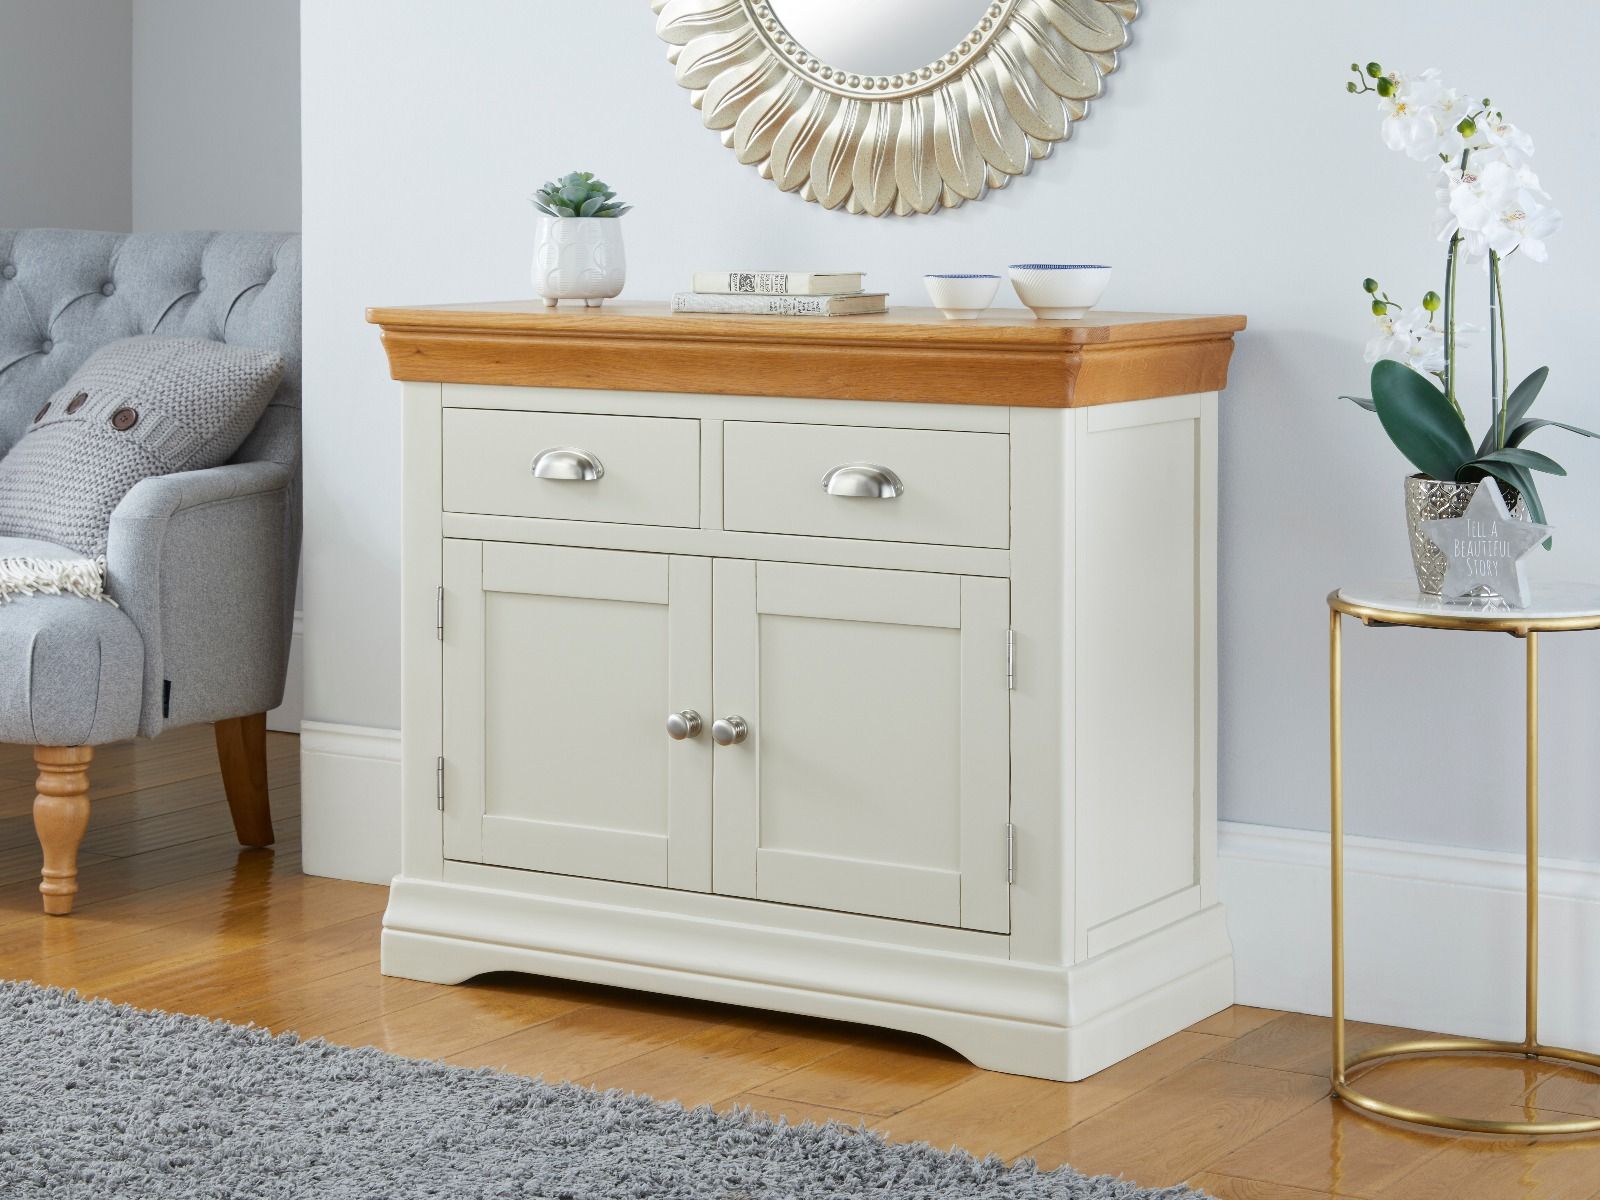 100cm Farmhouse Putty Grey Painted Small Oak Sideboard - 10% OFF WINTER SALE